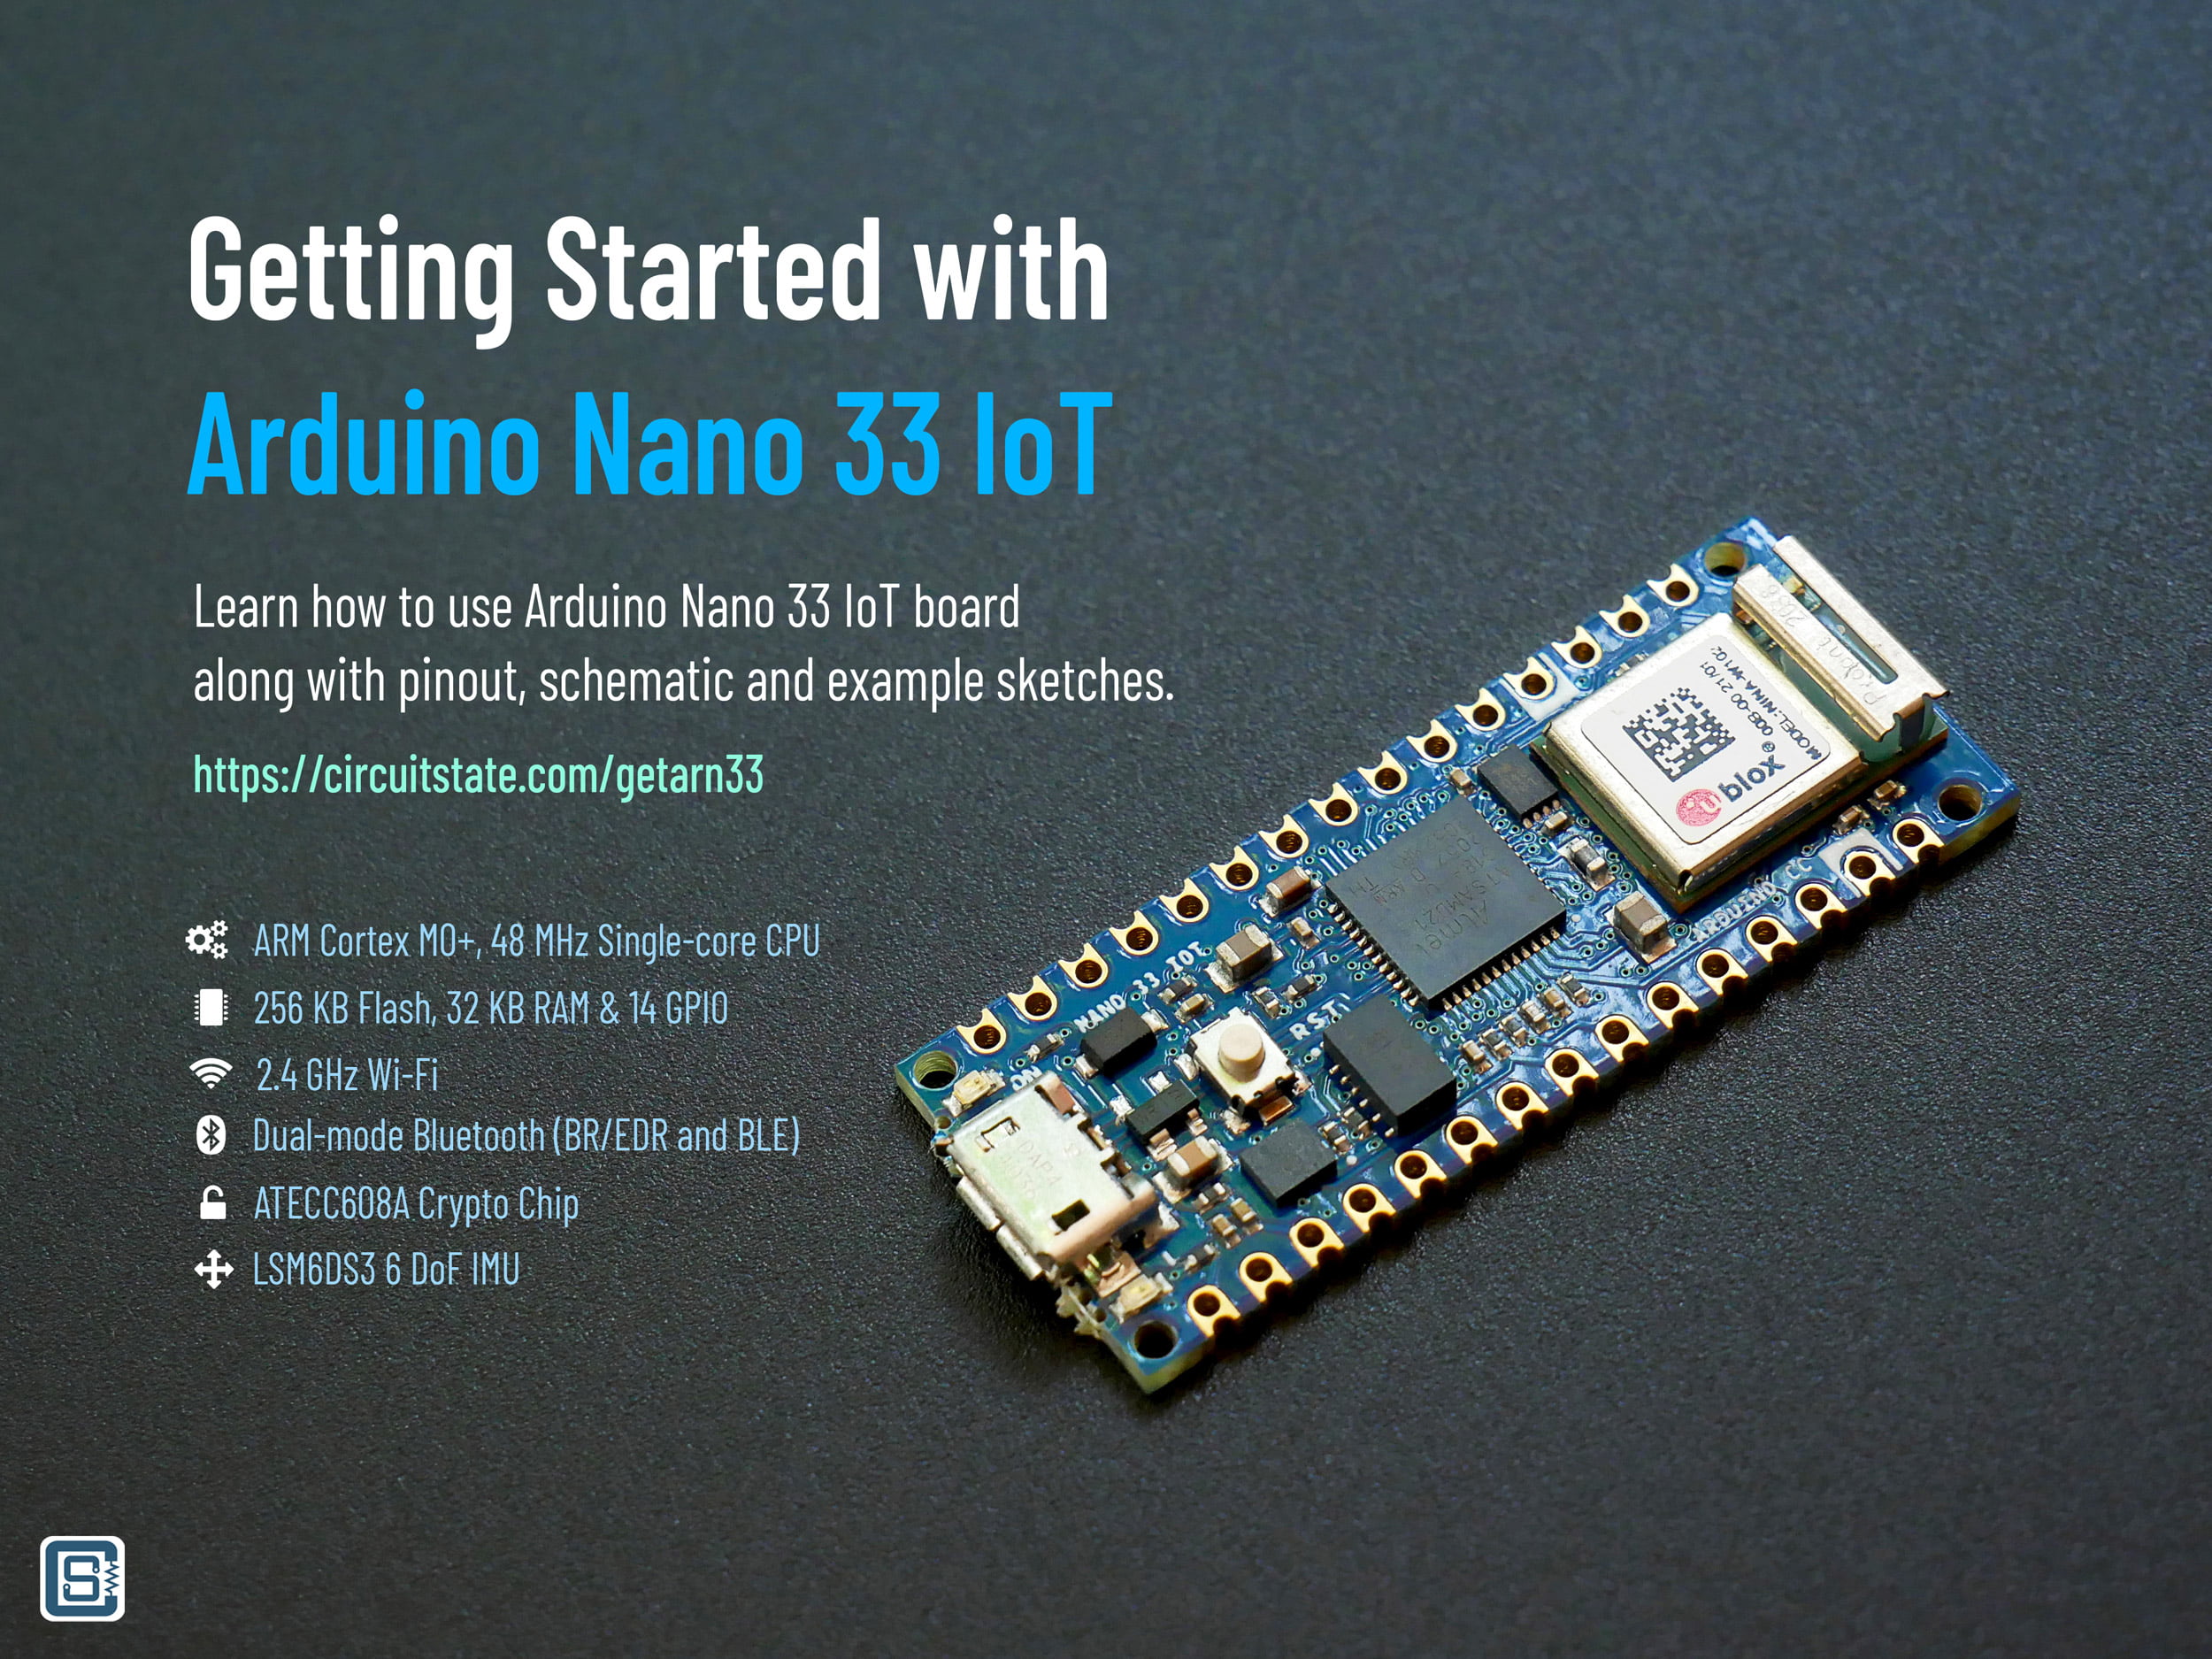 Getting Started with Arduino Nano 33 IoT Microcontroller Development Board – Pinout, Schematic & - Electronics